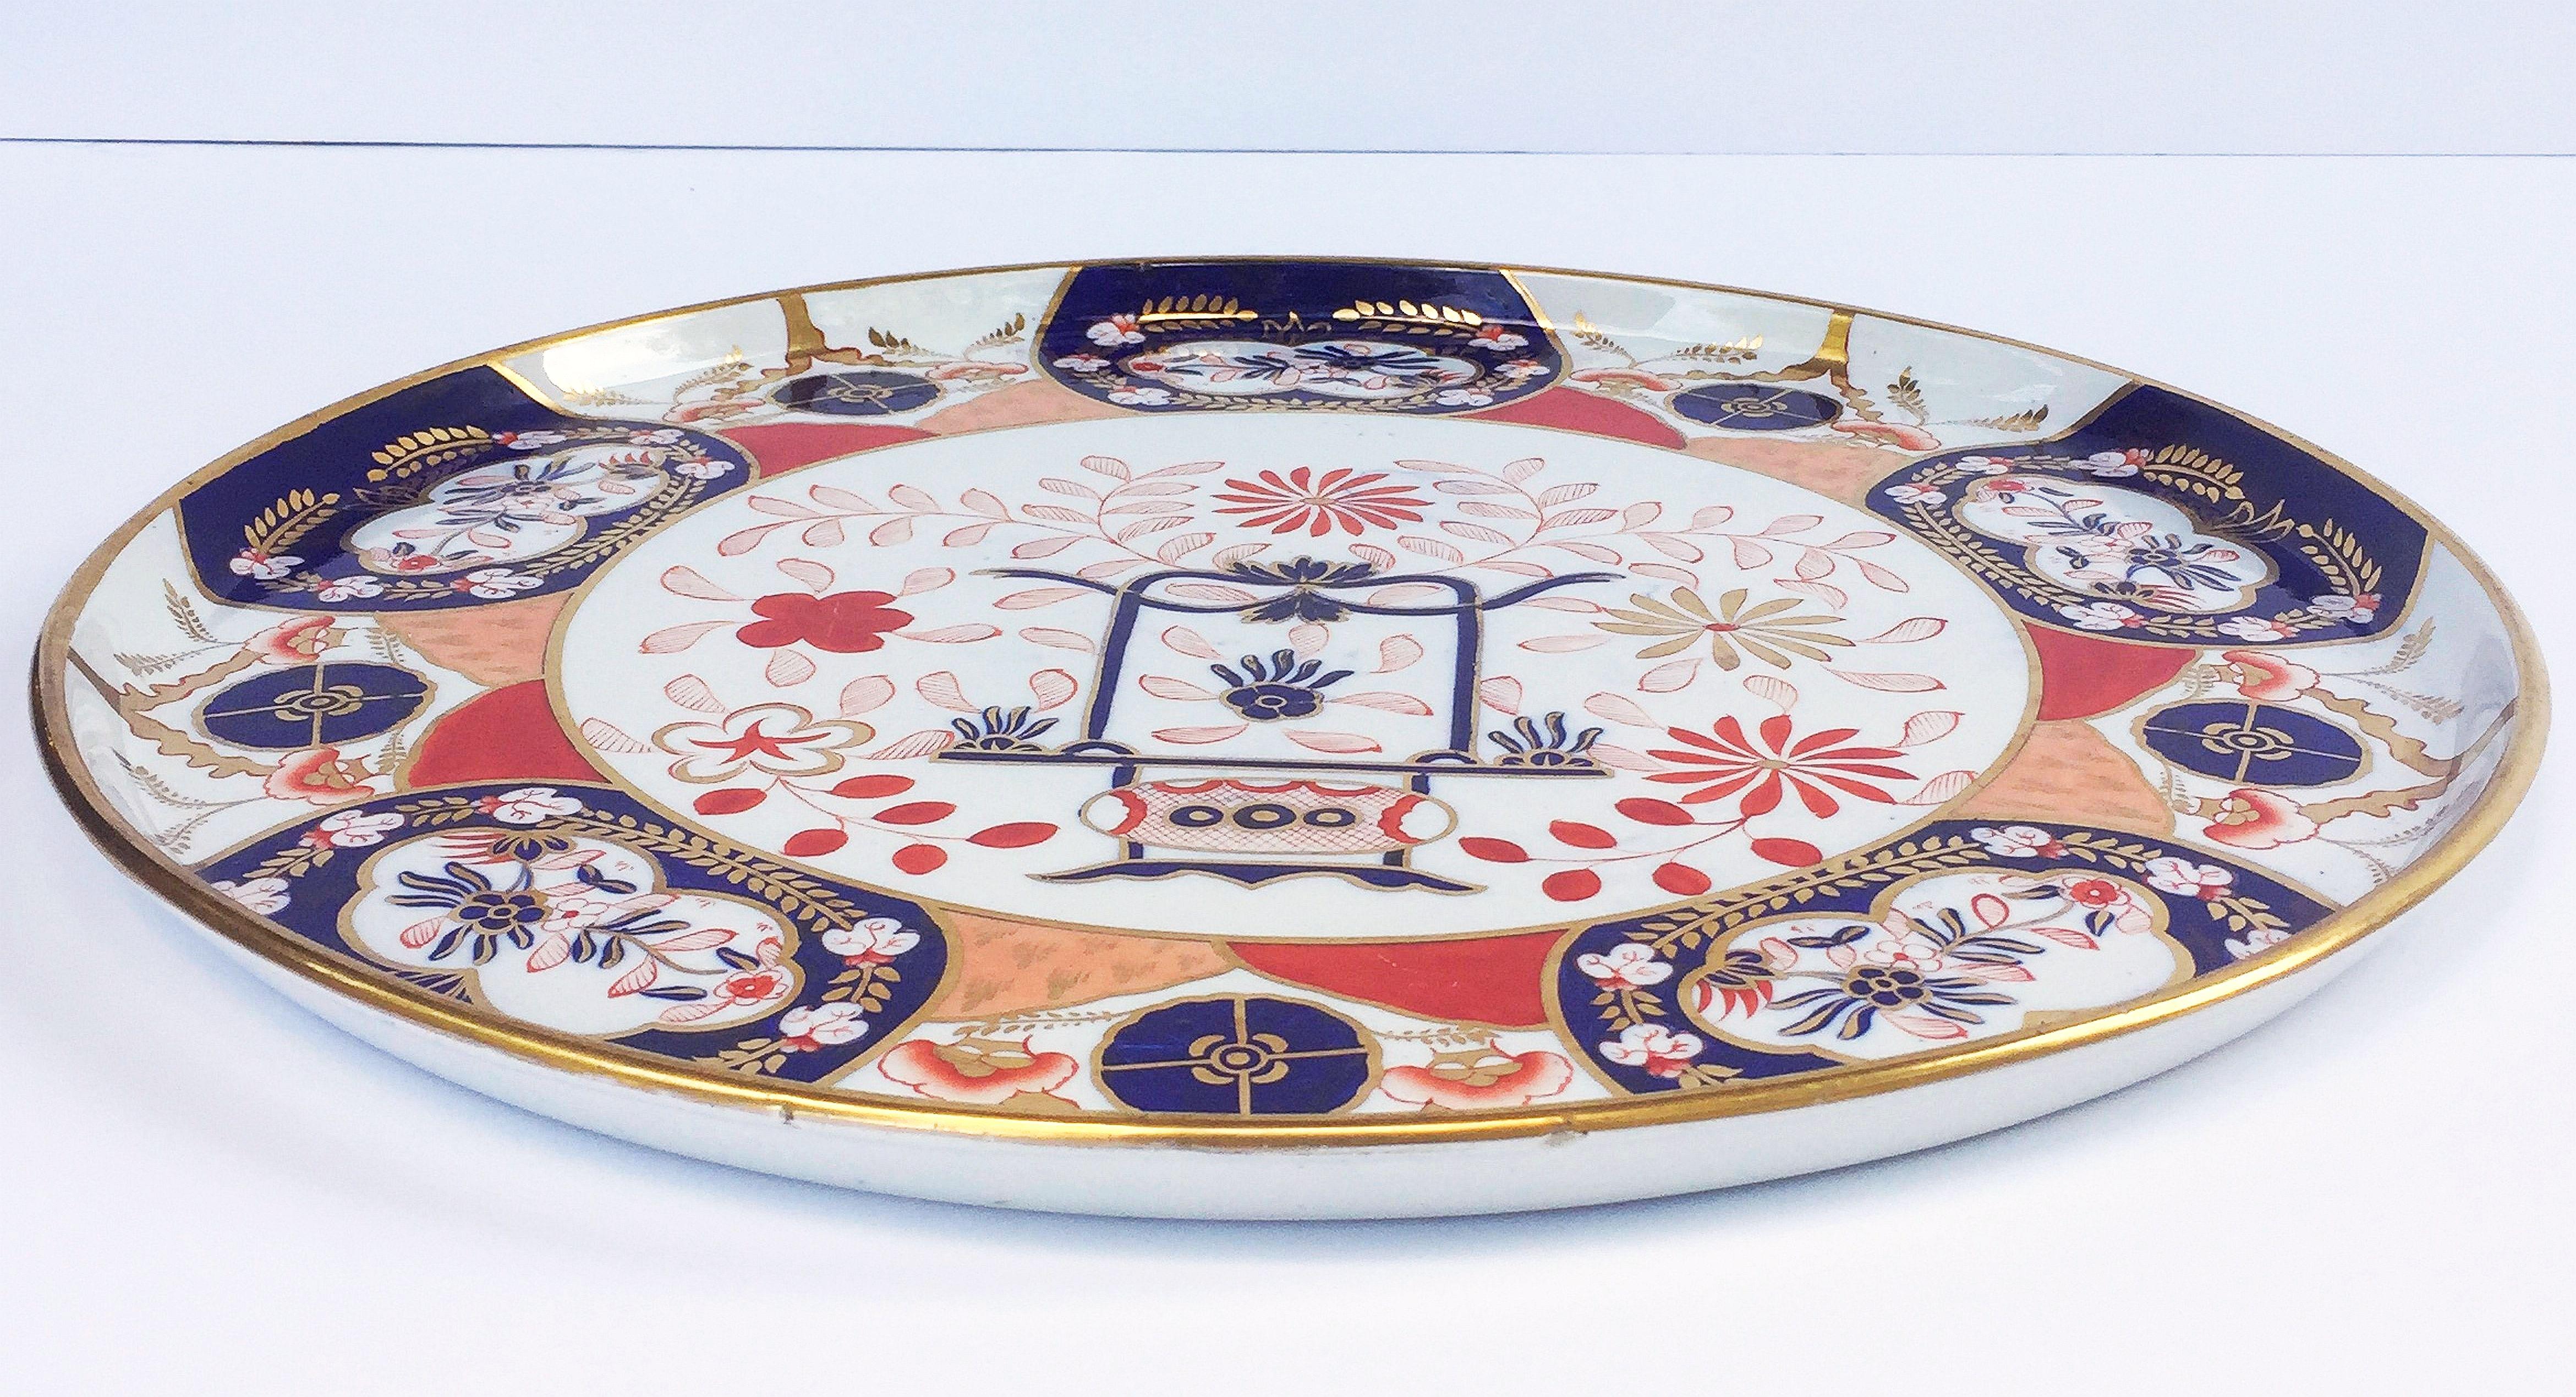 Large 19th c. English Imari Polychrome Charger with Gilt Accents by Copeland For Sale 2